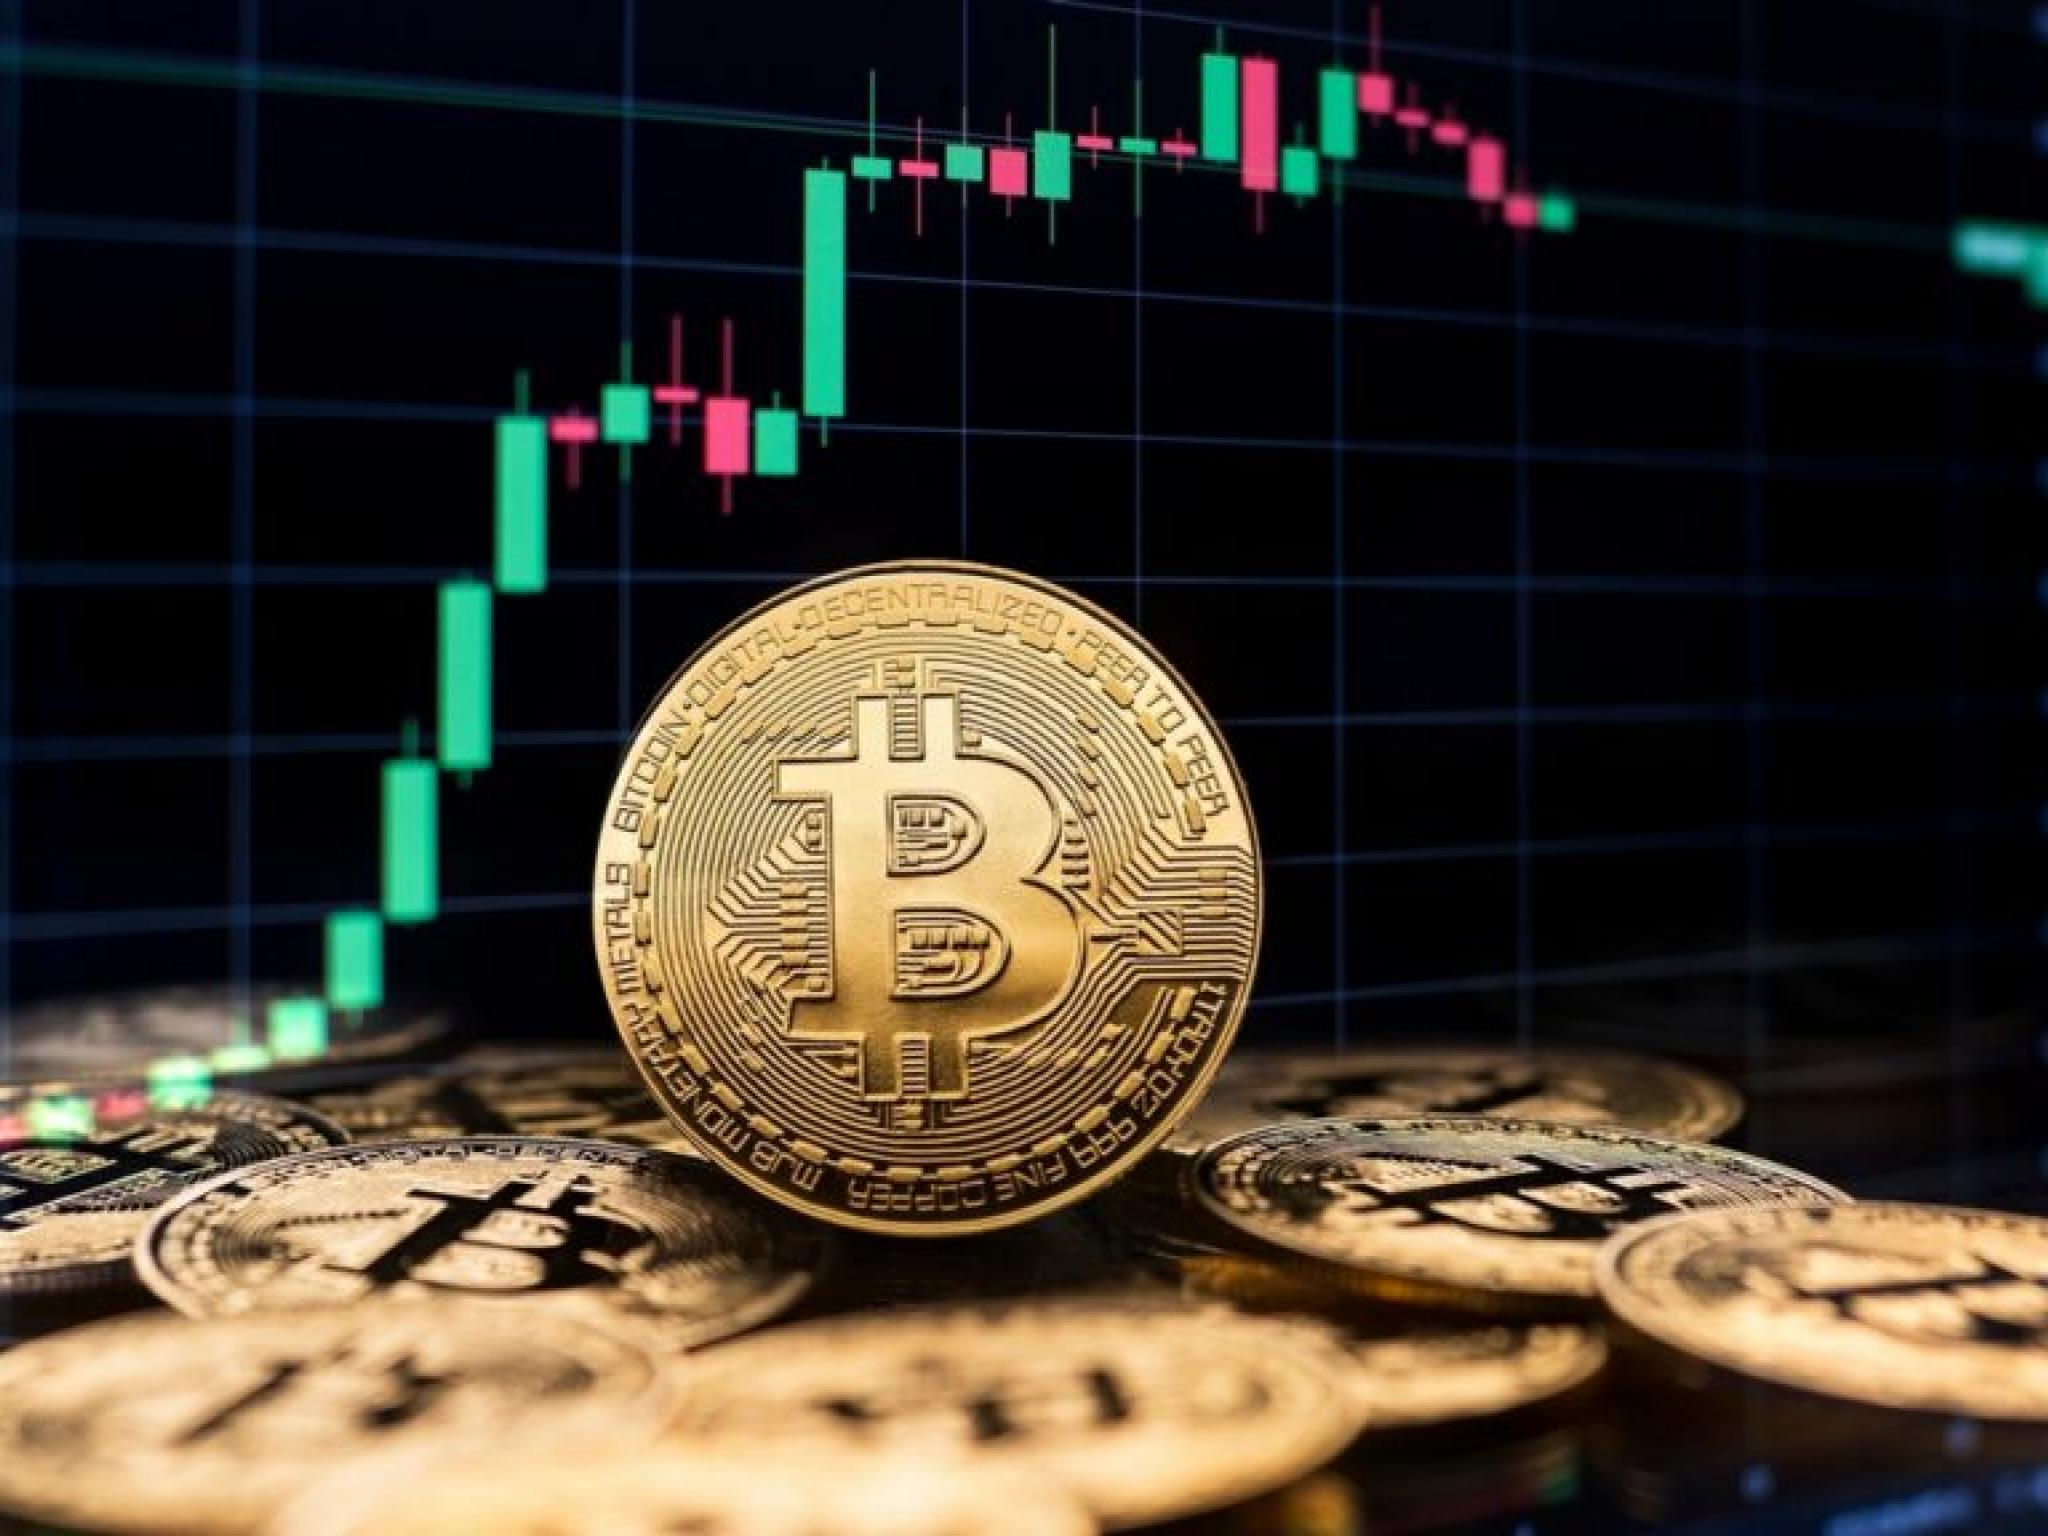  bitcoin-is-on-the-verge-of-a-massive-pump-claims-trader 